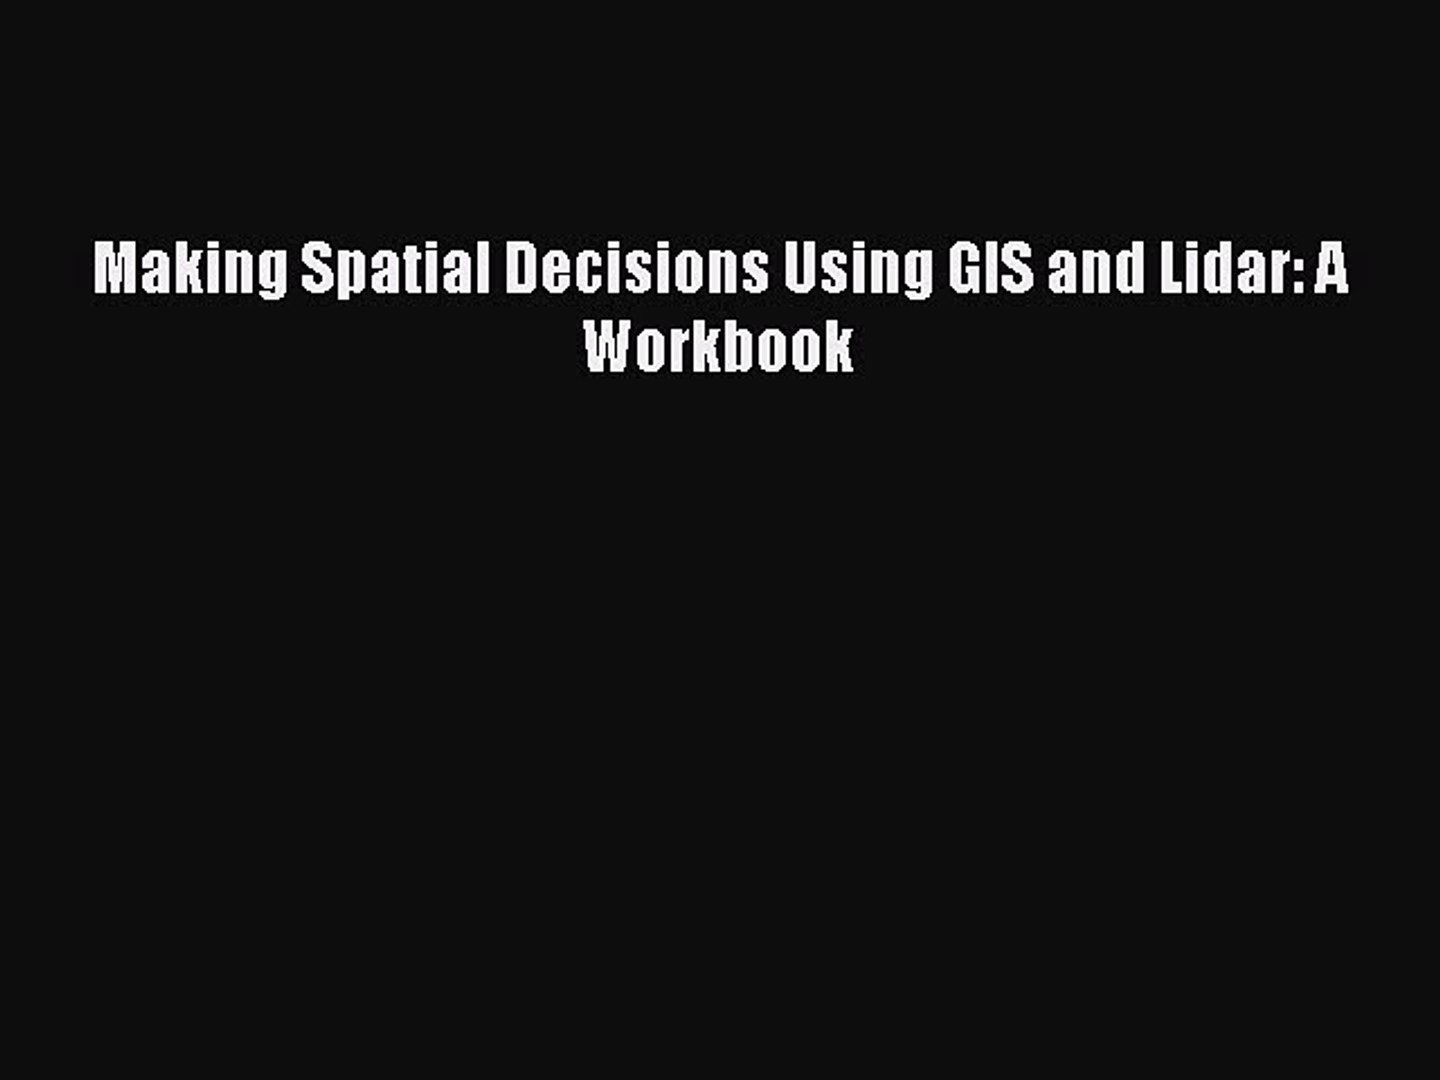 Making Spatial Decisions Using GIS and Remote Sensing A Workbook